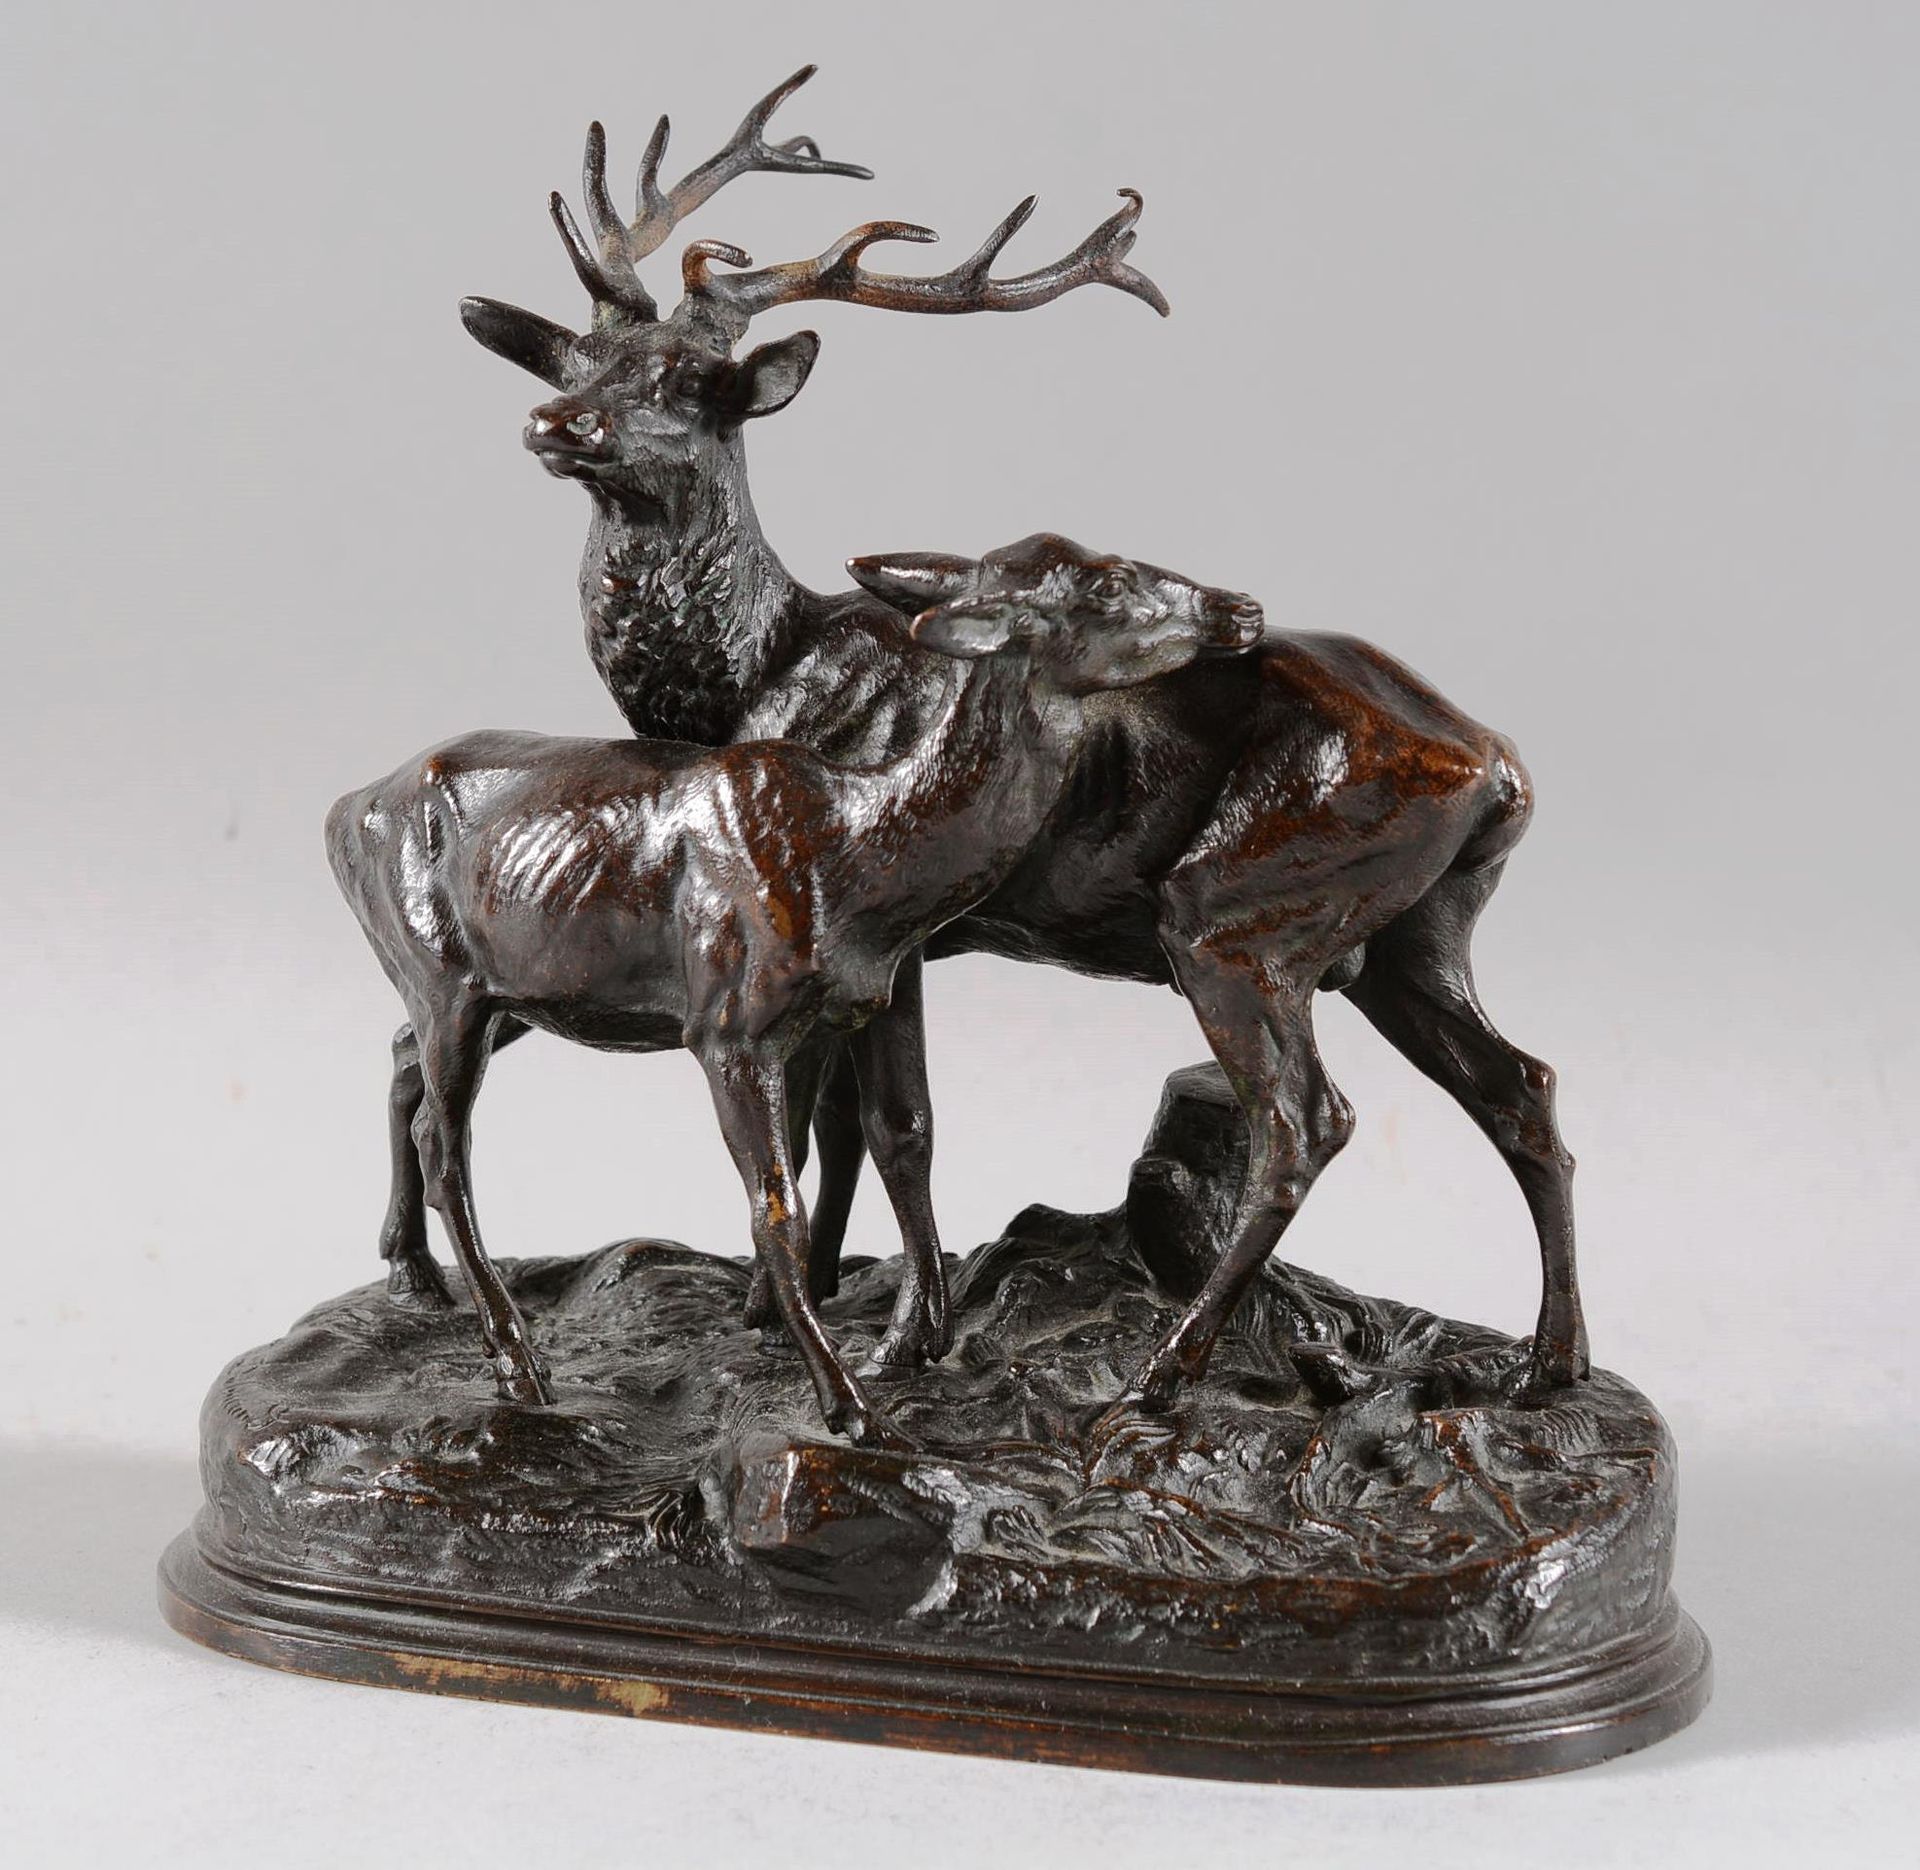 Alfred DUBUCAND (1828-1894) Alfred DUBUCAND (1828-1894), after

"Stag and doe".
&hellip;